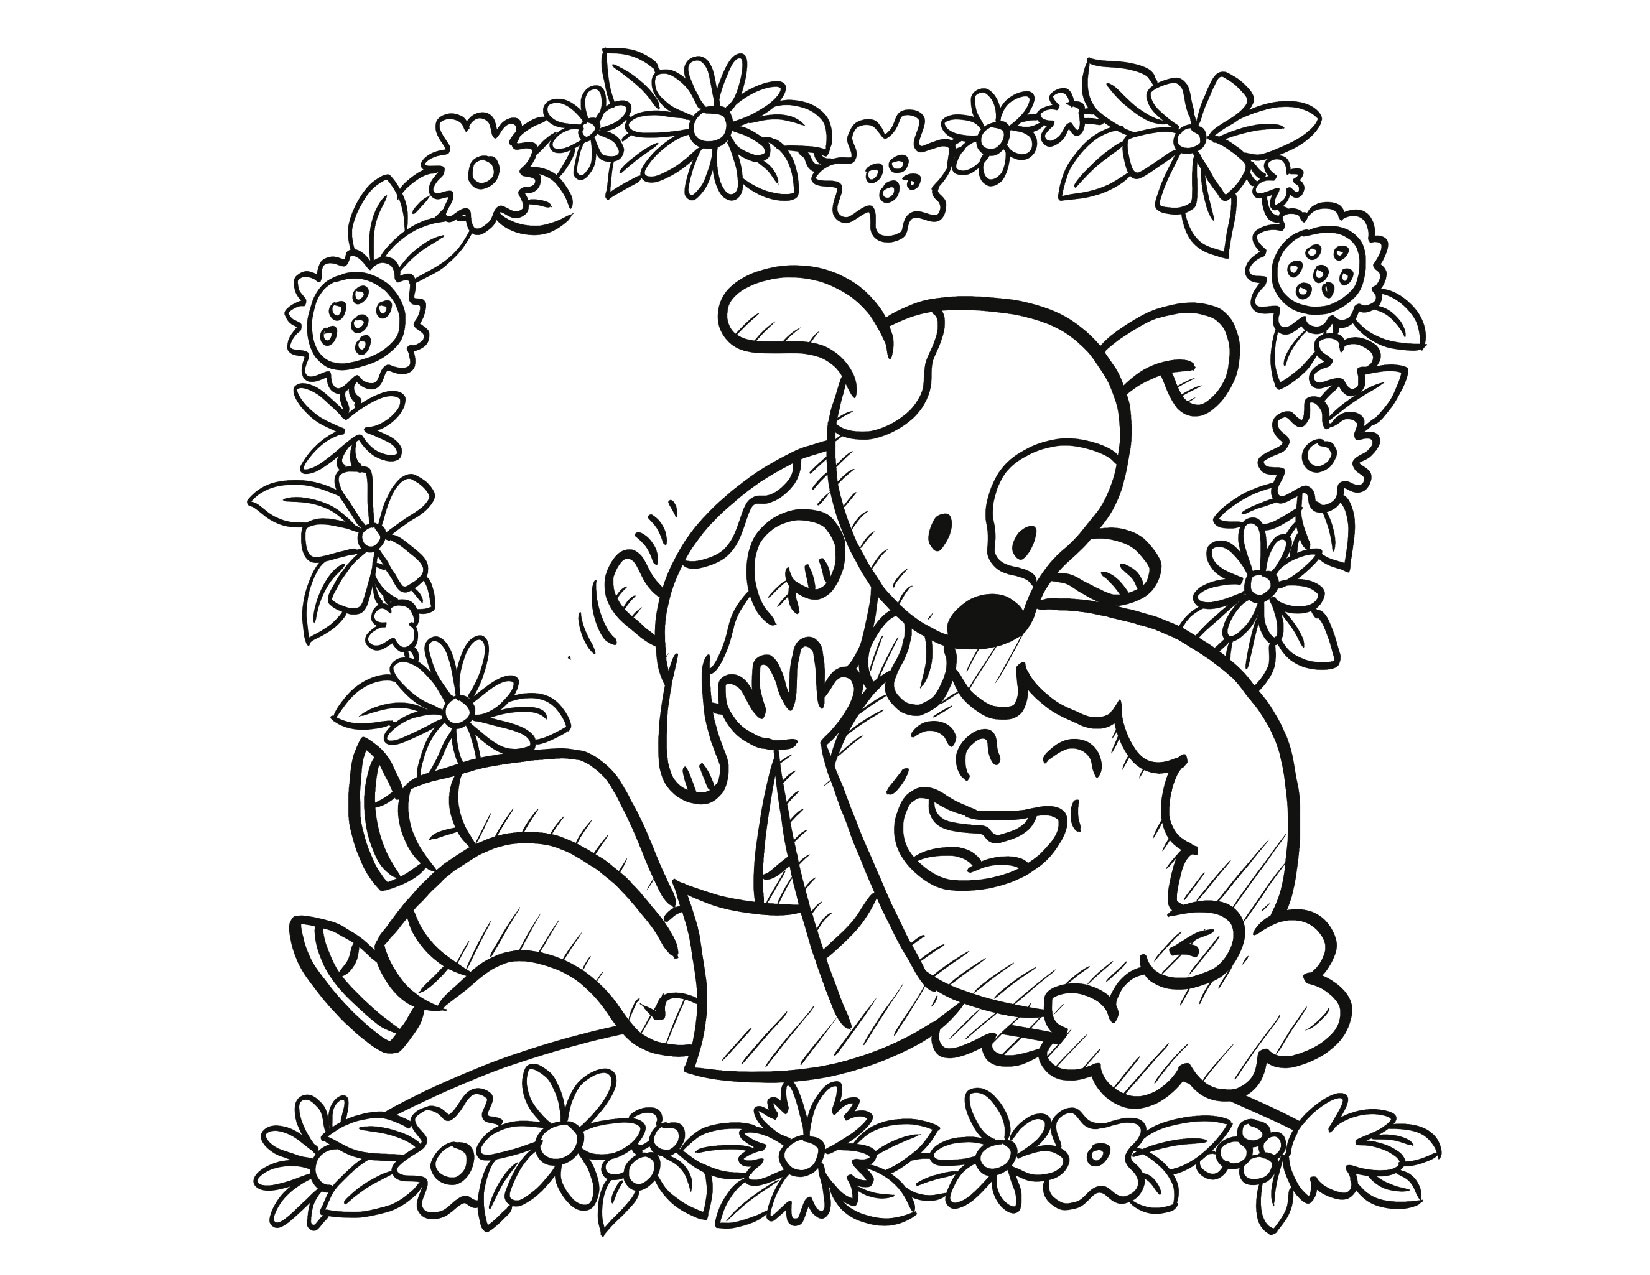 Coloring page with a little boy playing with his dog in a border of flowers shaped like a heart